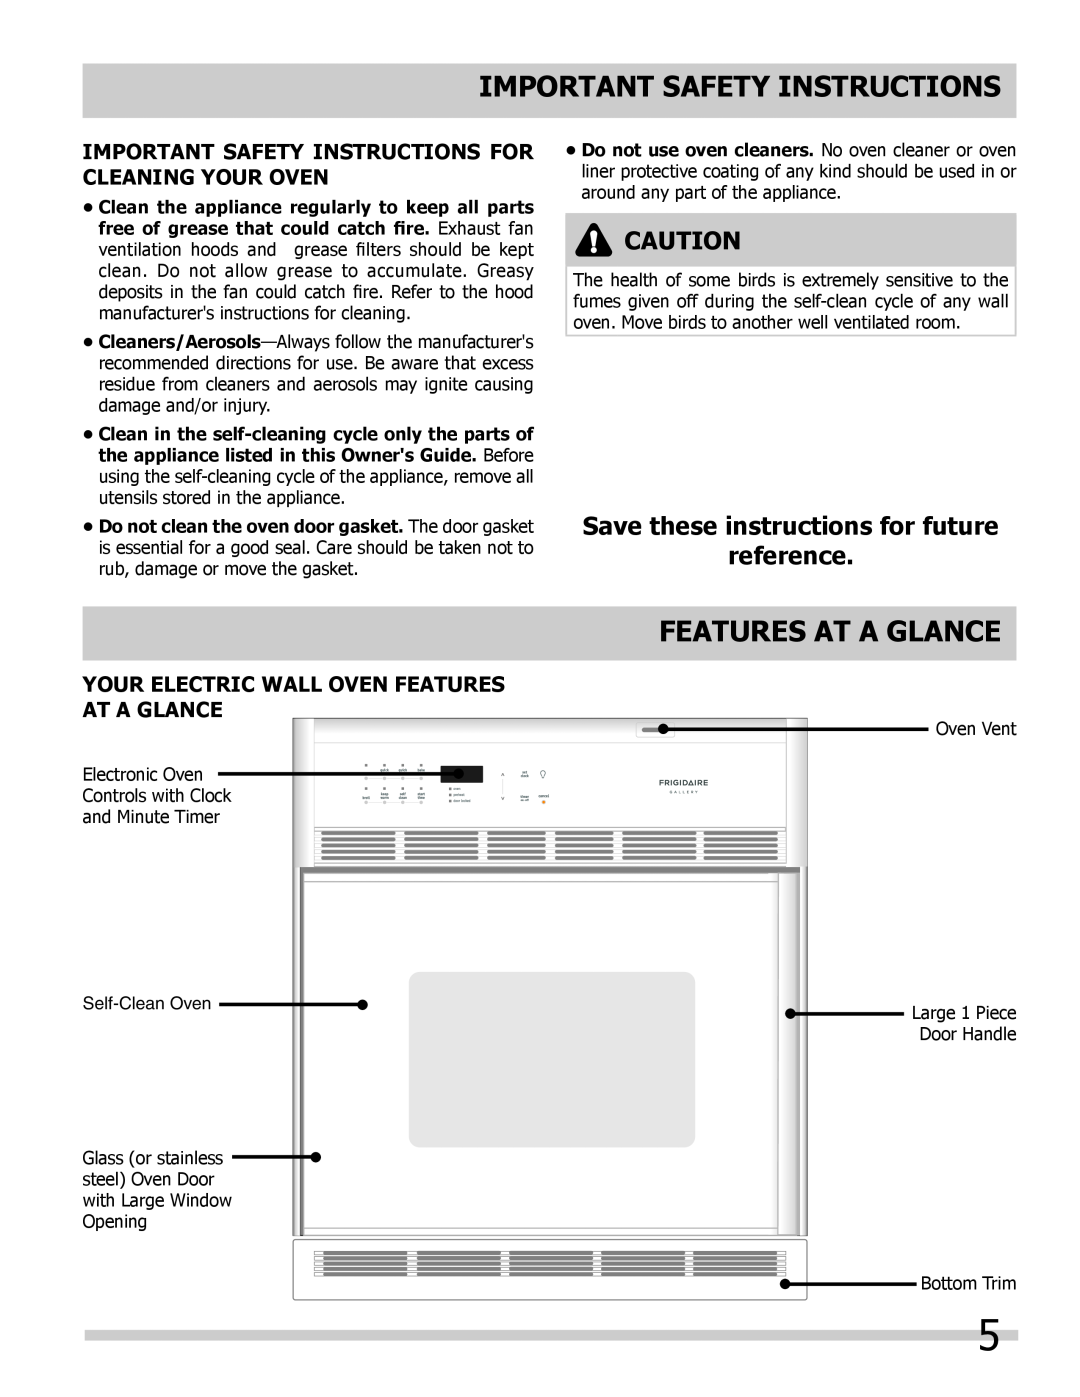 Frigidaire 318205325 Features At A Glance, Save these instructions for future reference, Important Safety Instructions 